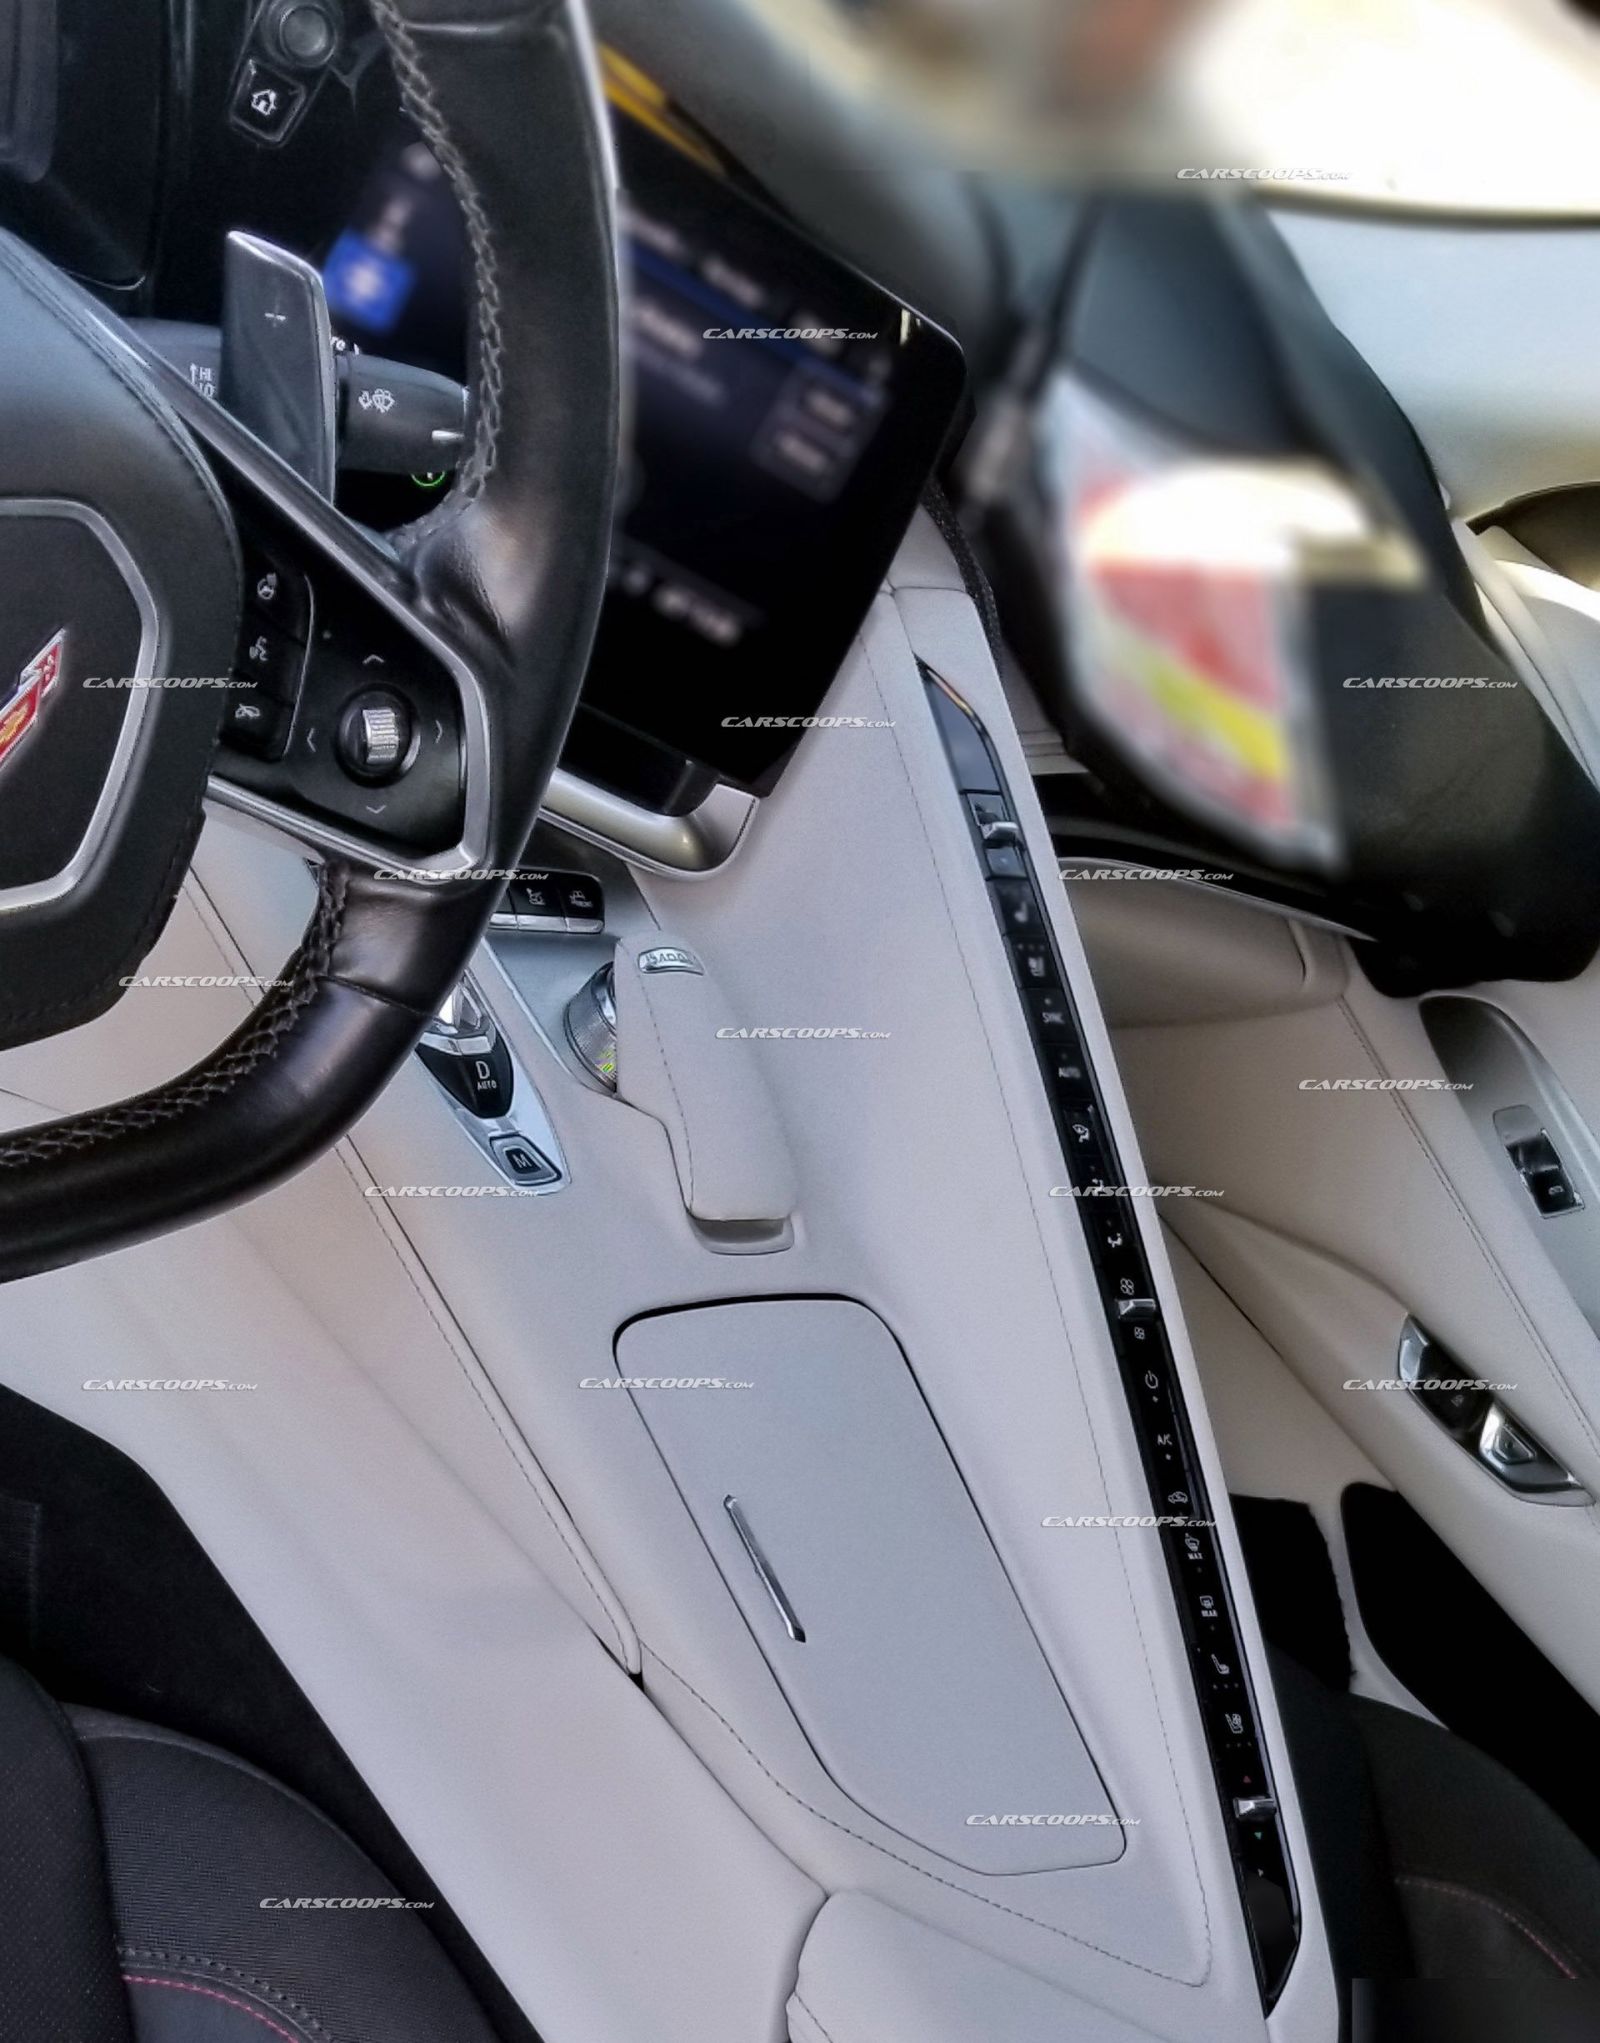 Illustration for article titled 2020 Corvette C8 interior first pics